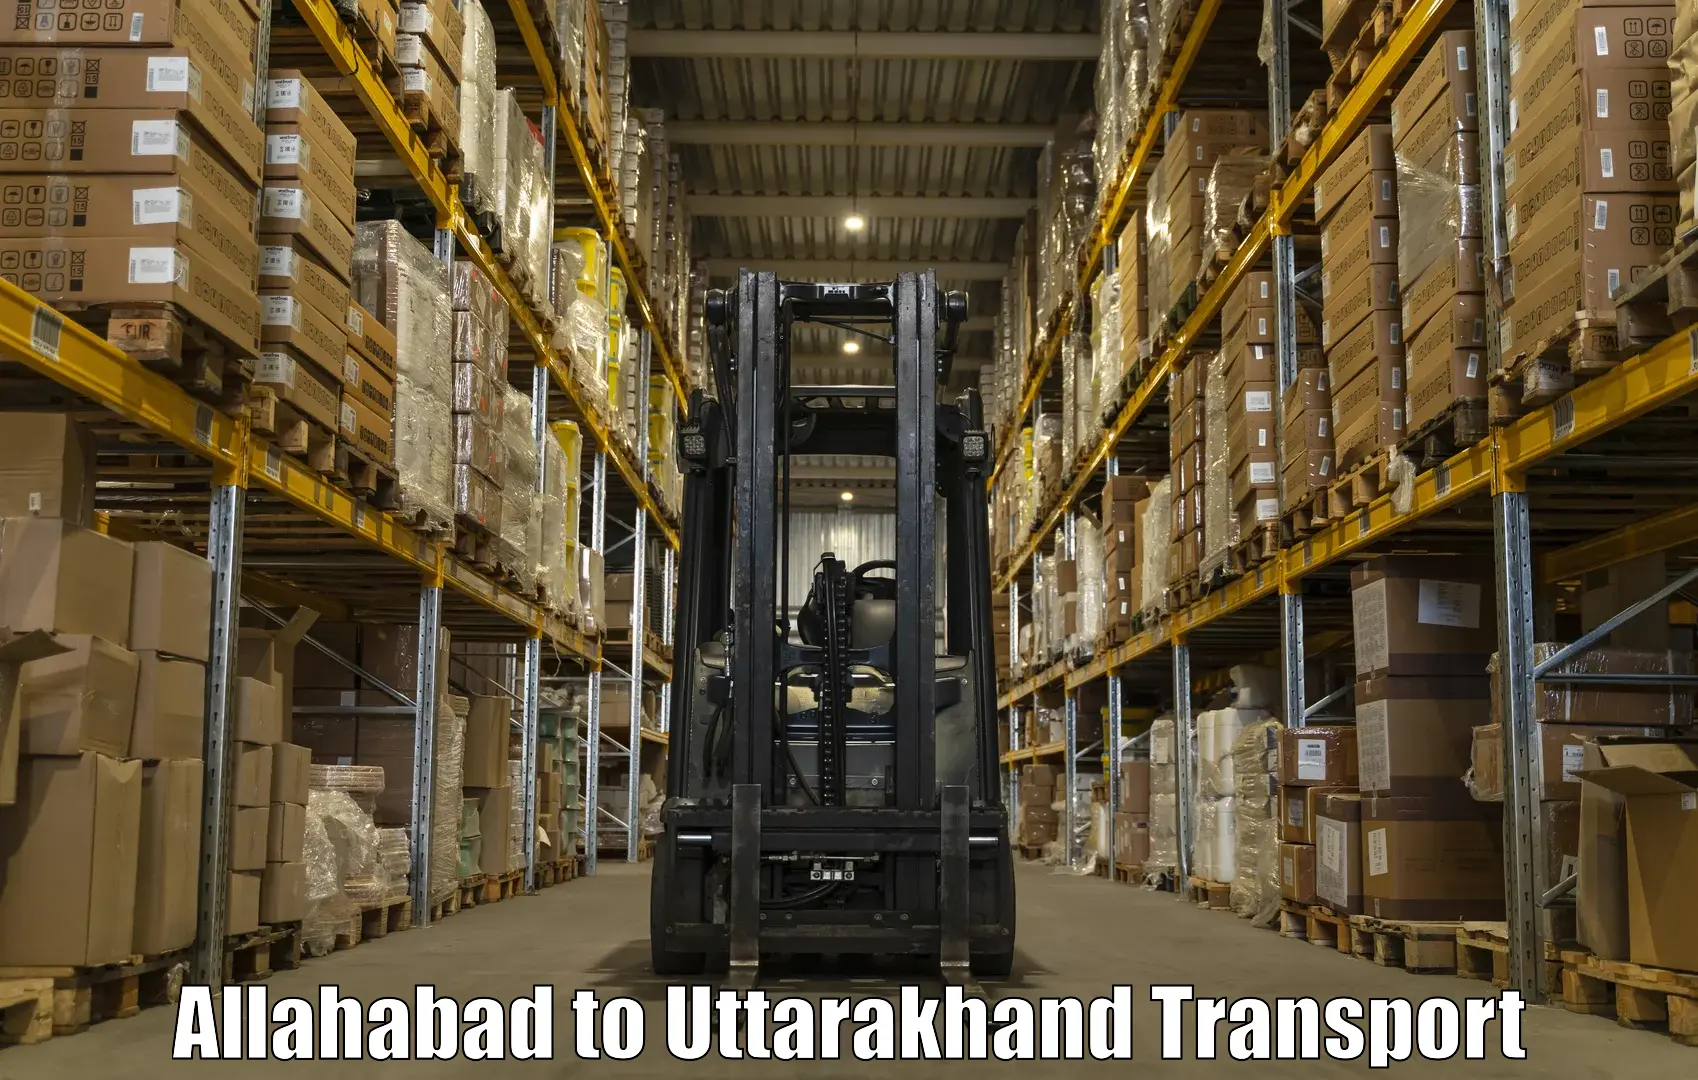 Express transport services Allahabad to Haridwar